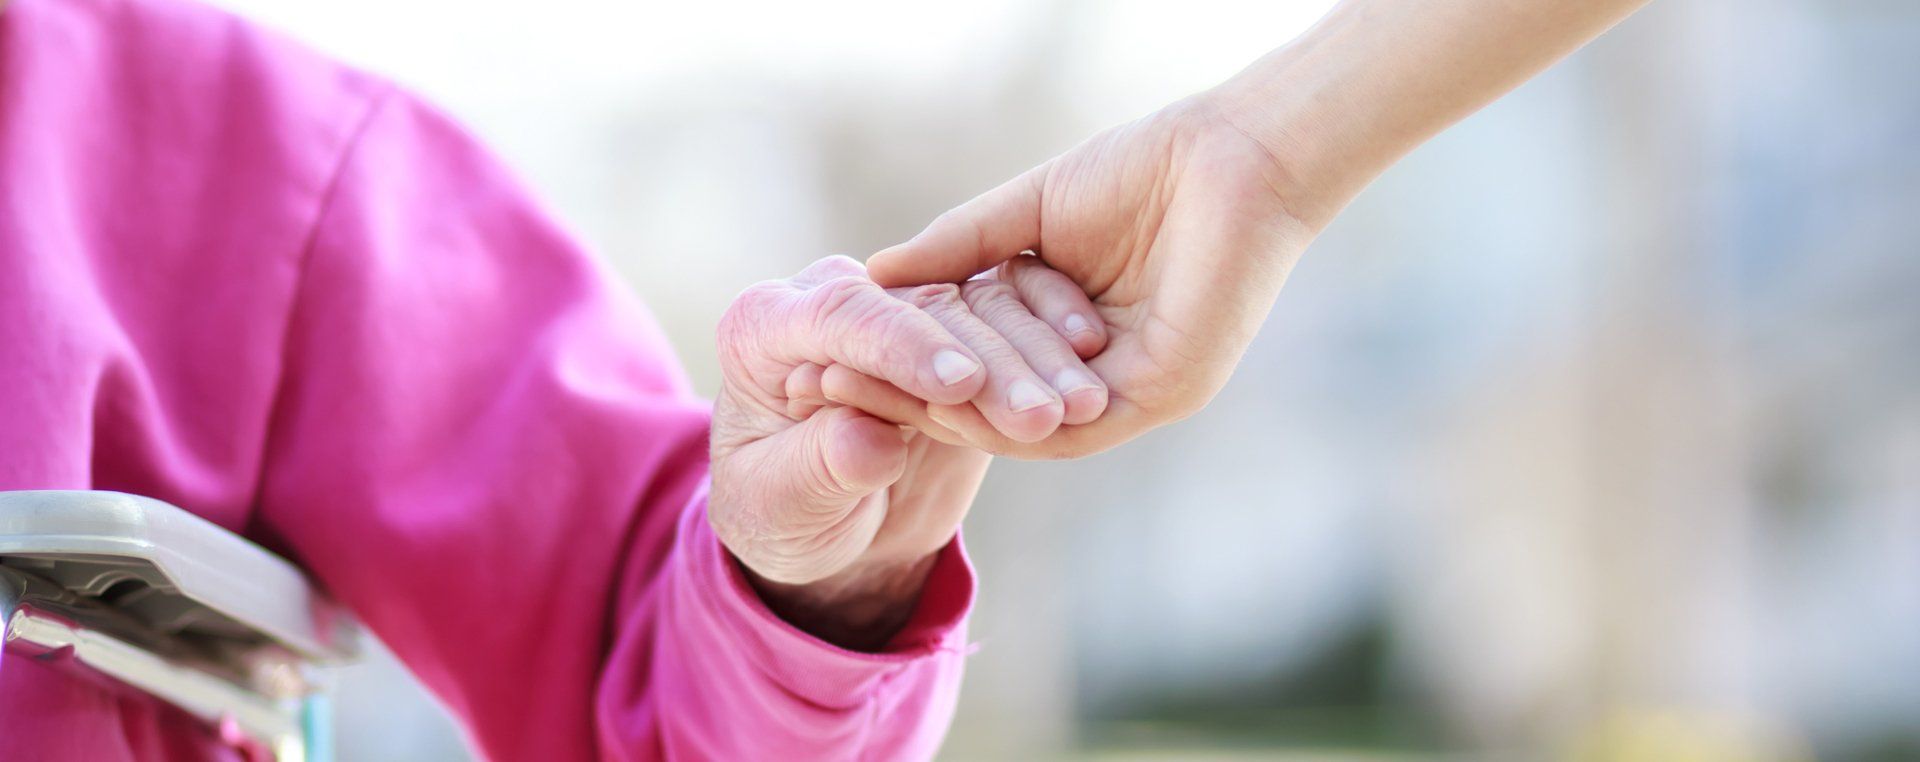 Image of the hand of a caregiver gently grasping the hand of a resident